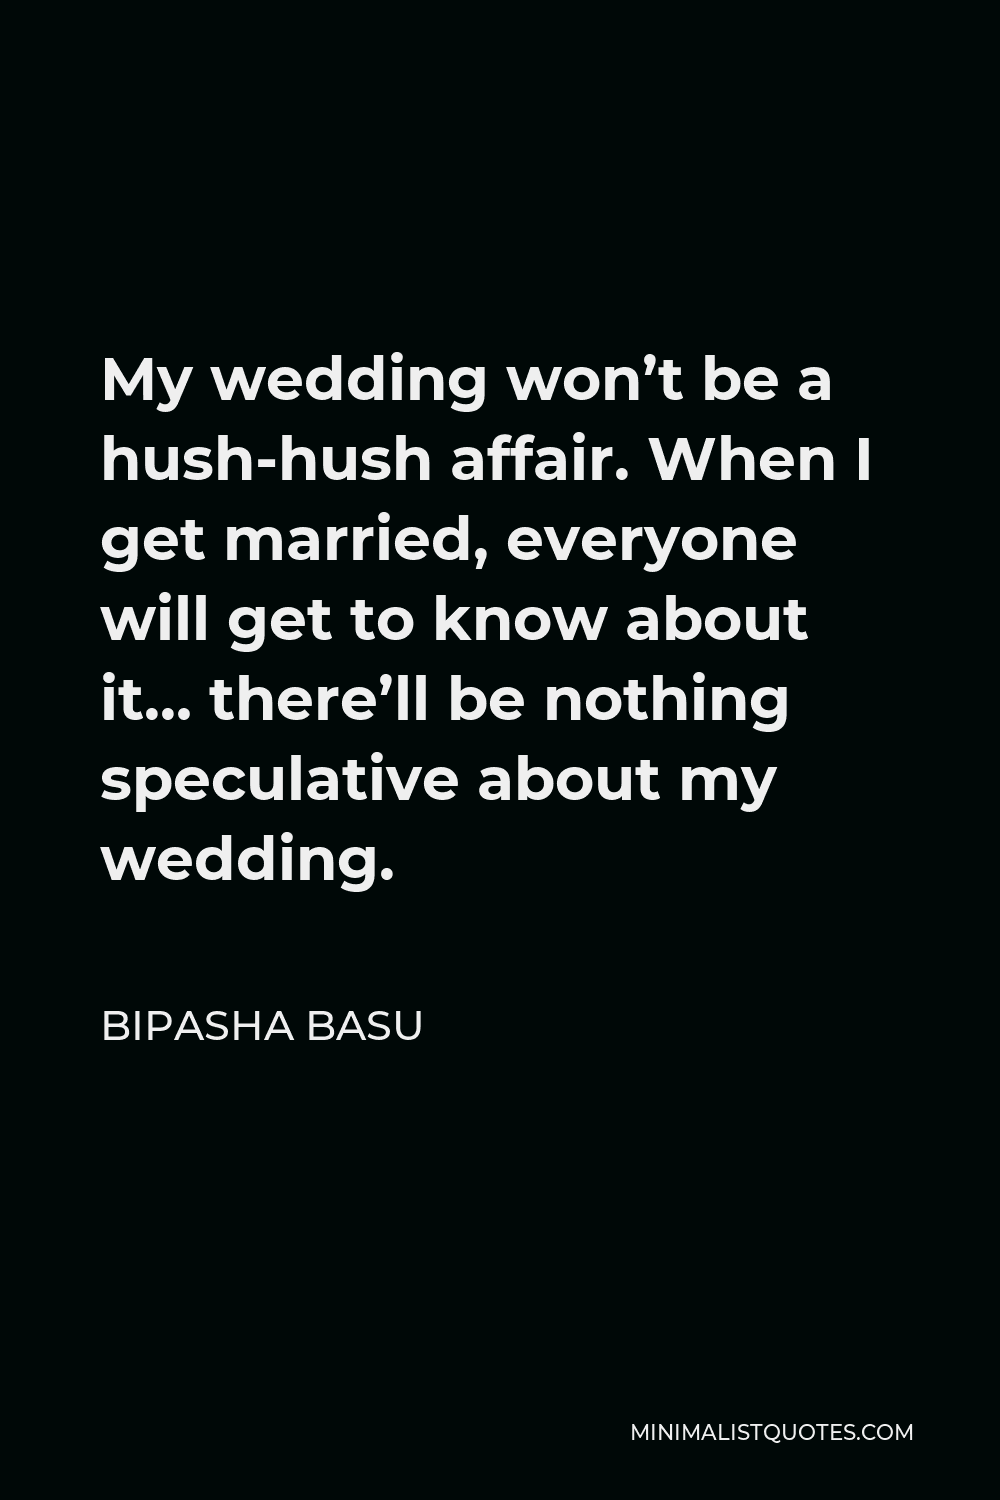 Bipasha Basu Quote - My wedding won’t be a hush-hush affair. When I get married, everyone will get to know about it… there’ll be nothing speculative about my wedding.